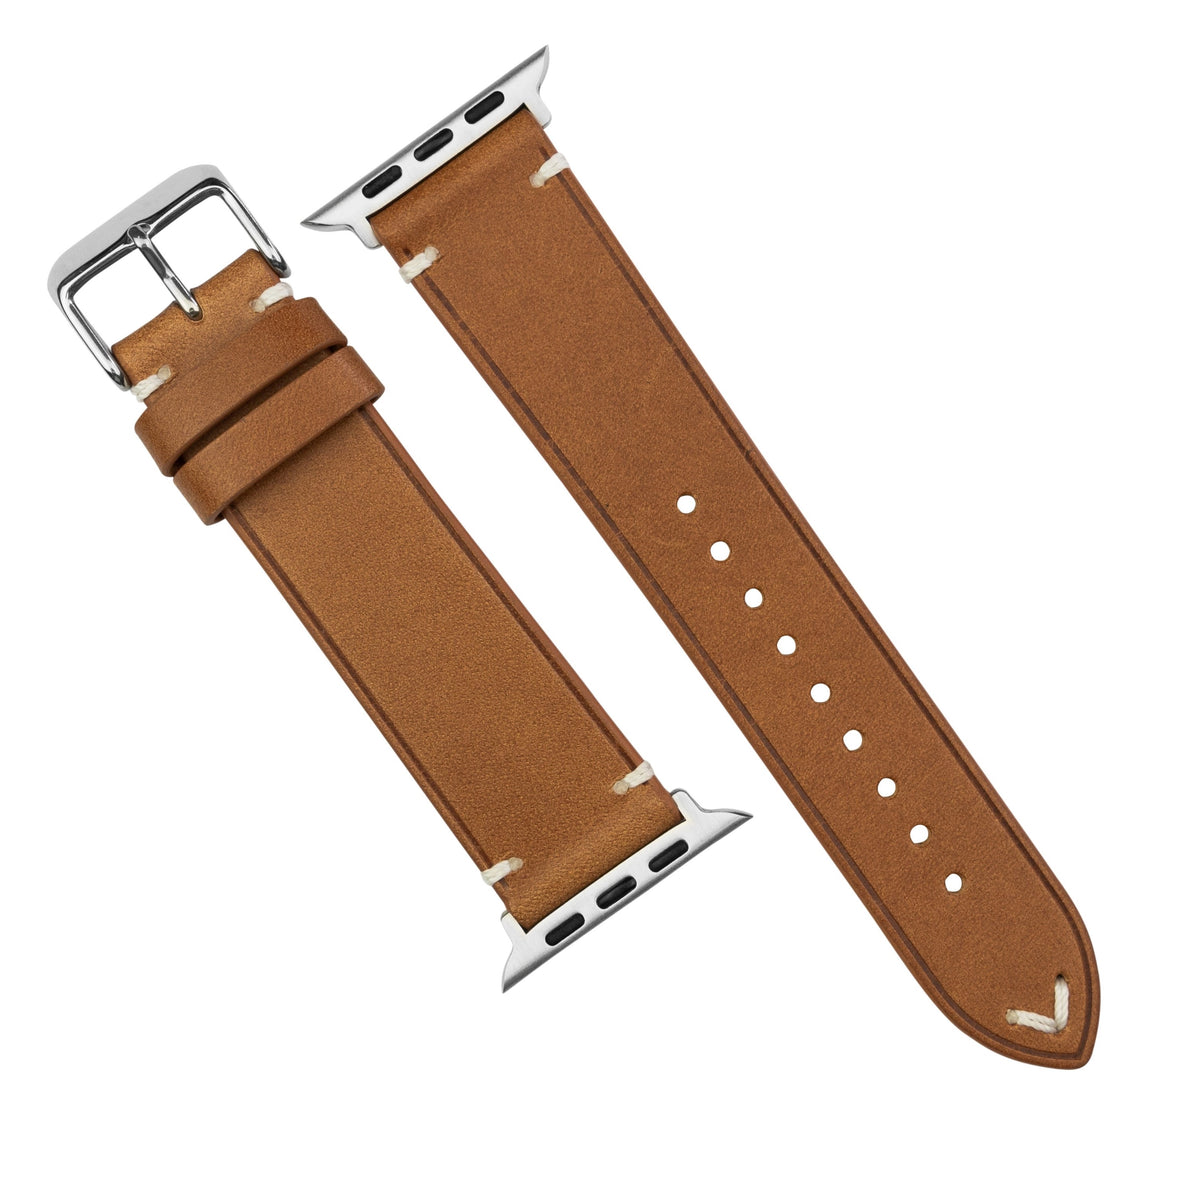 Emery Vintage Buttero Leather Strap in Tan (38 & 40mm) - Nomad Watch Works SG